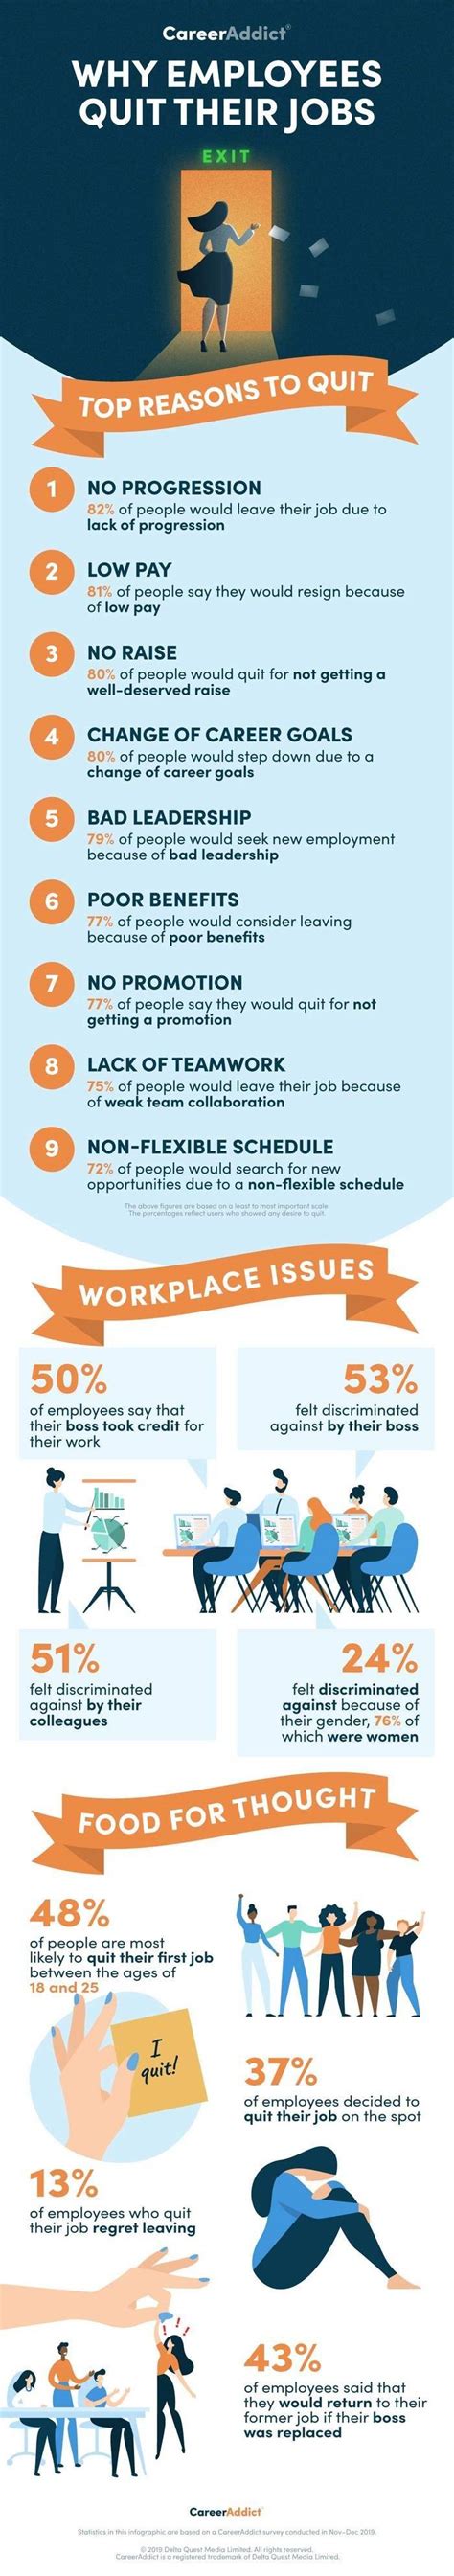 9 Common Reasons Why Employees Quit Their Jobs